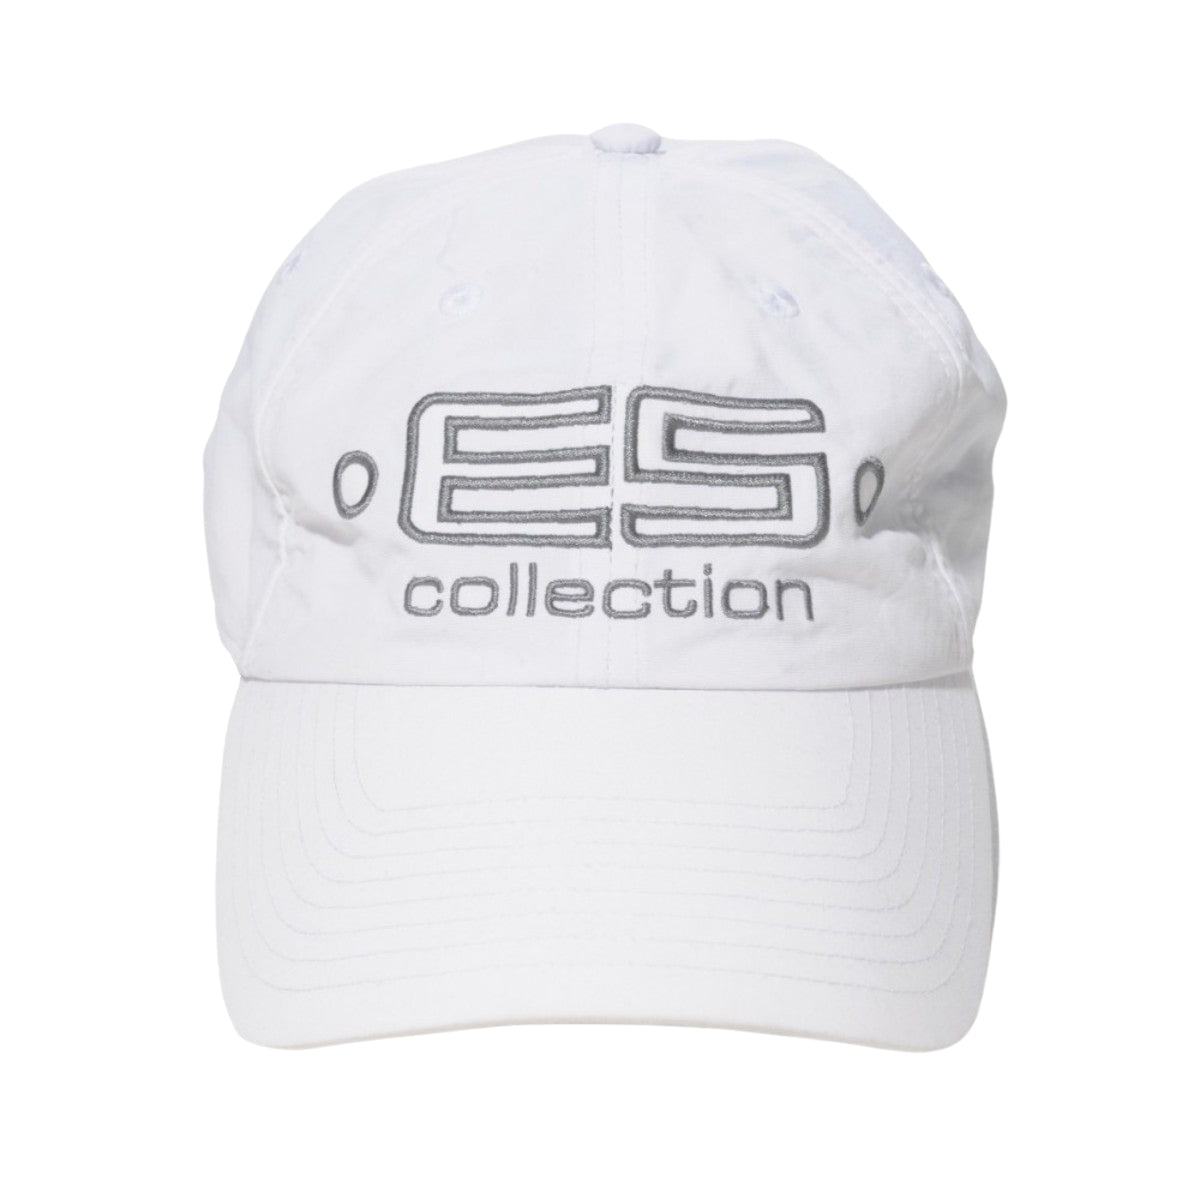 ES Collection Embroidered Baseball Cap White CAP002